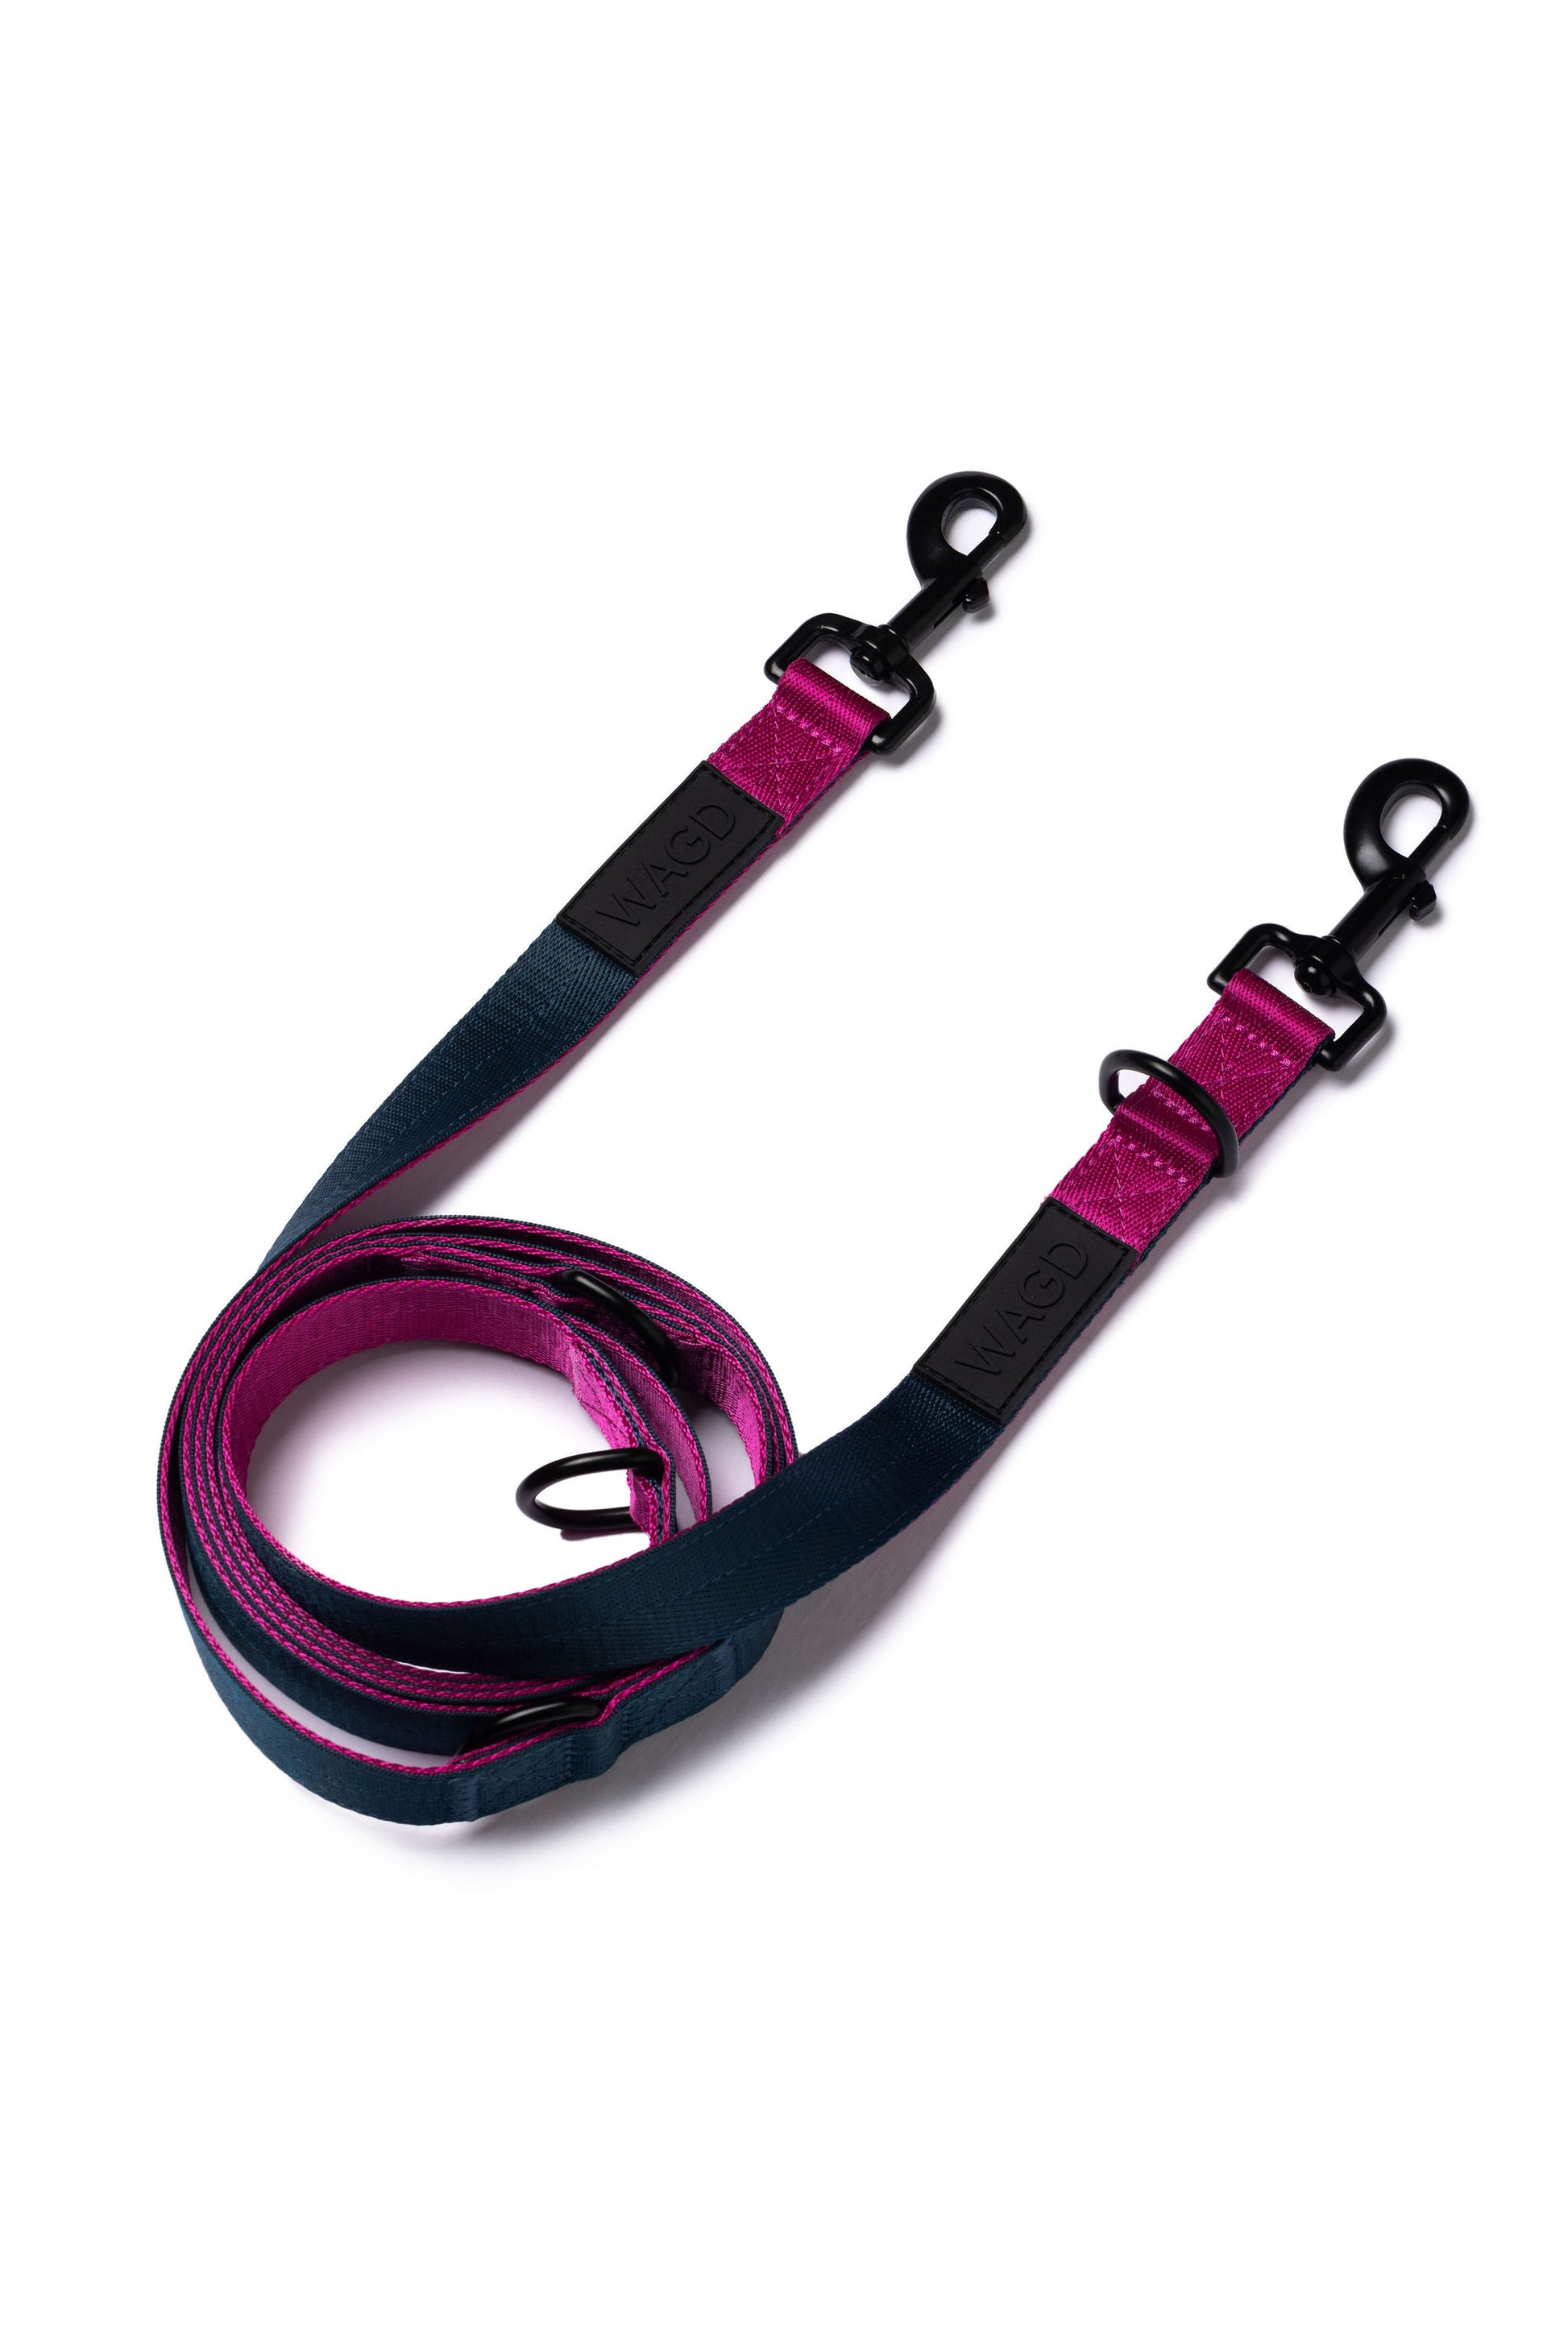 Multi length lead in Peacock and Pink with 2 black metal clips at either end and with WAGD rubber logo. 